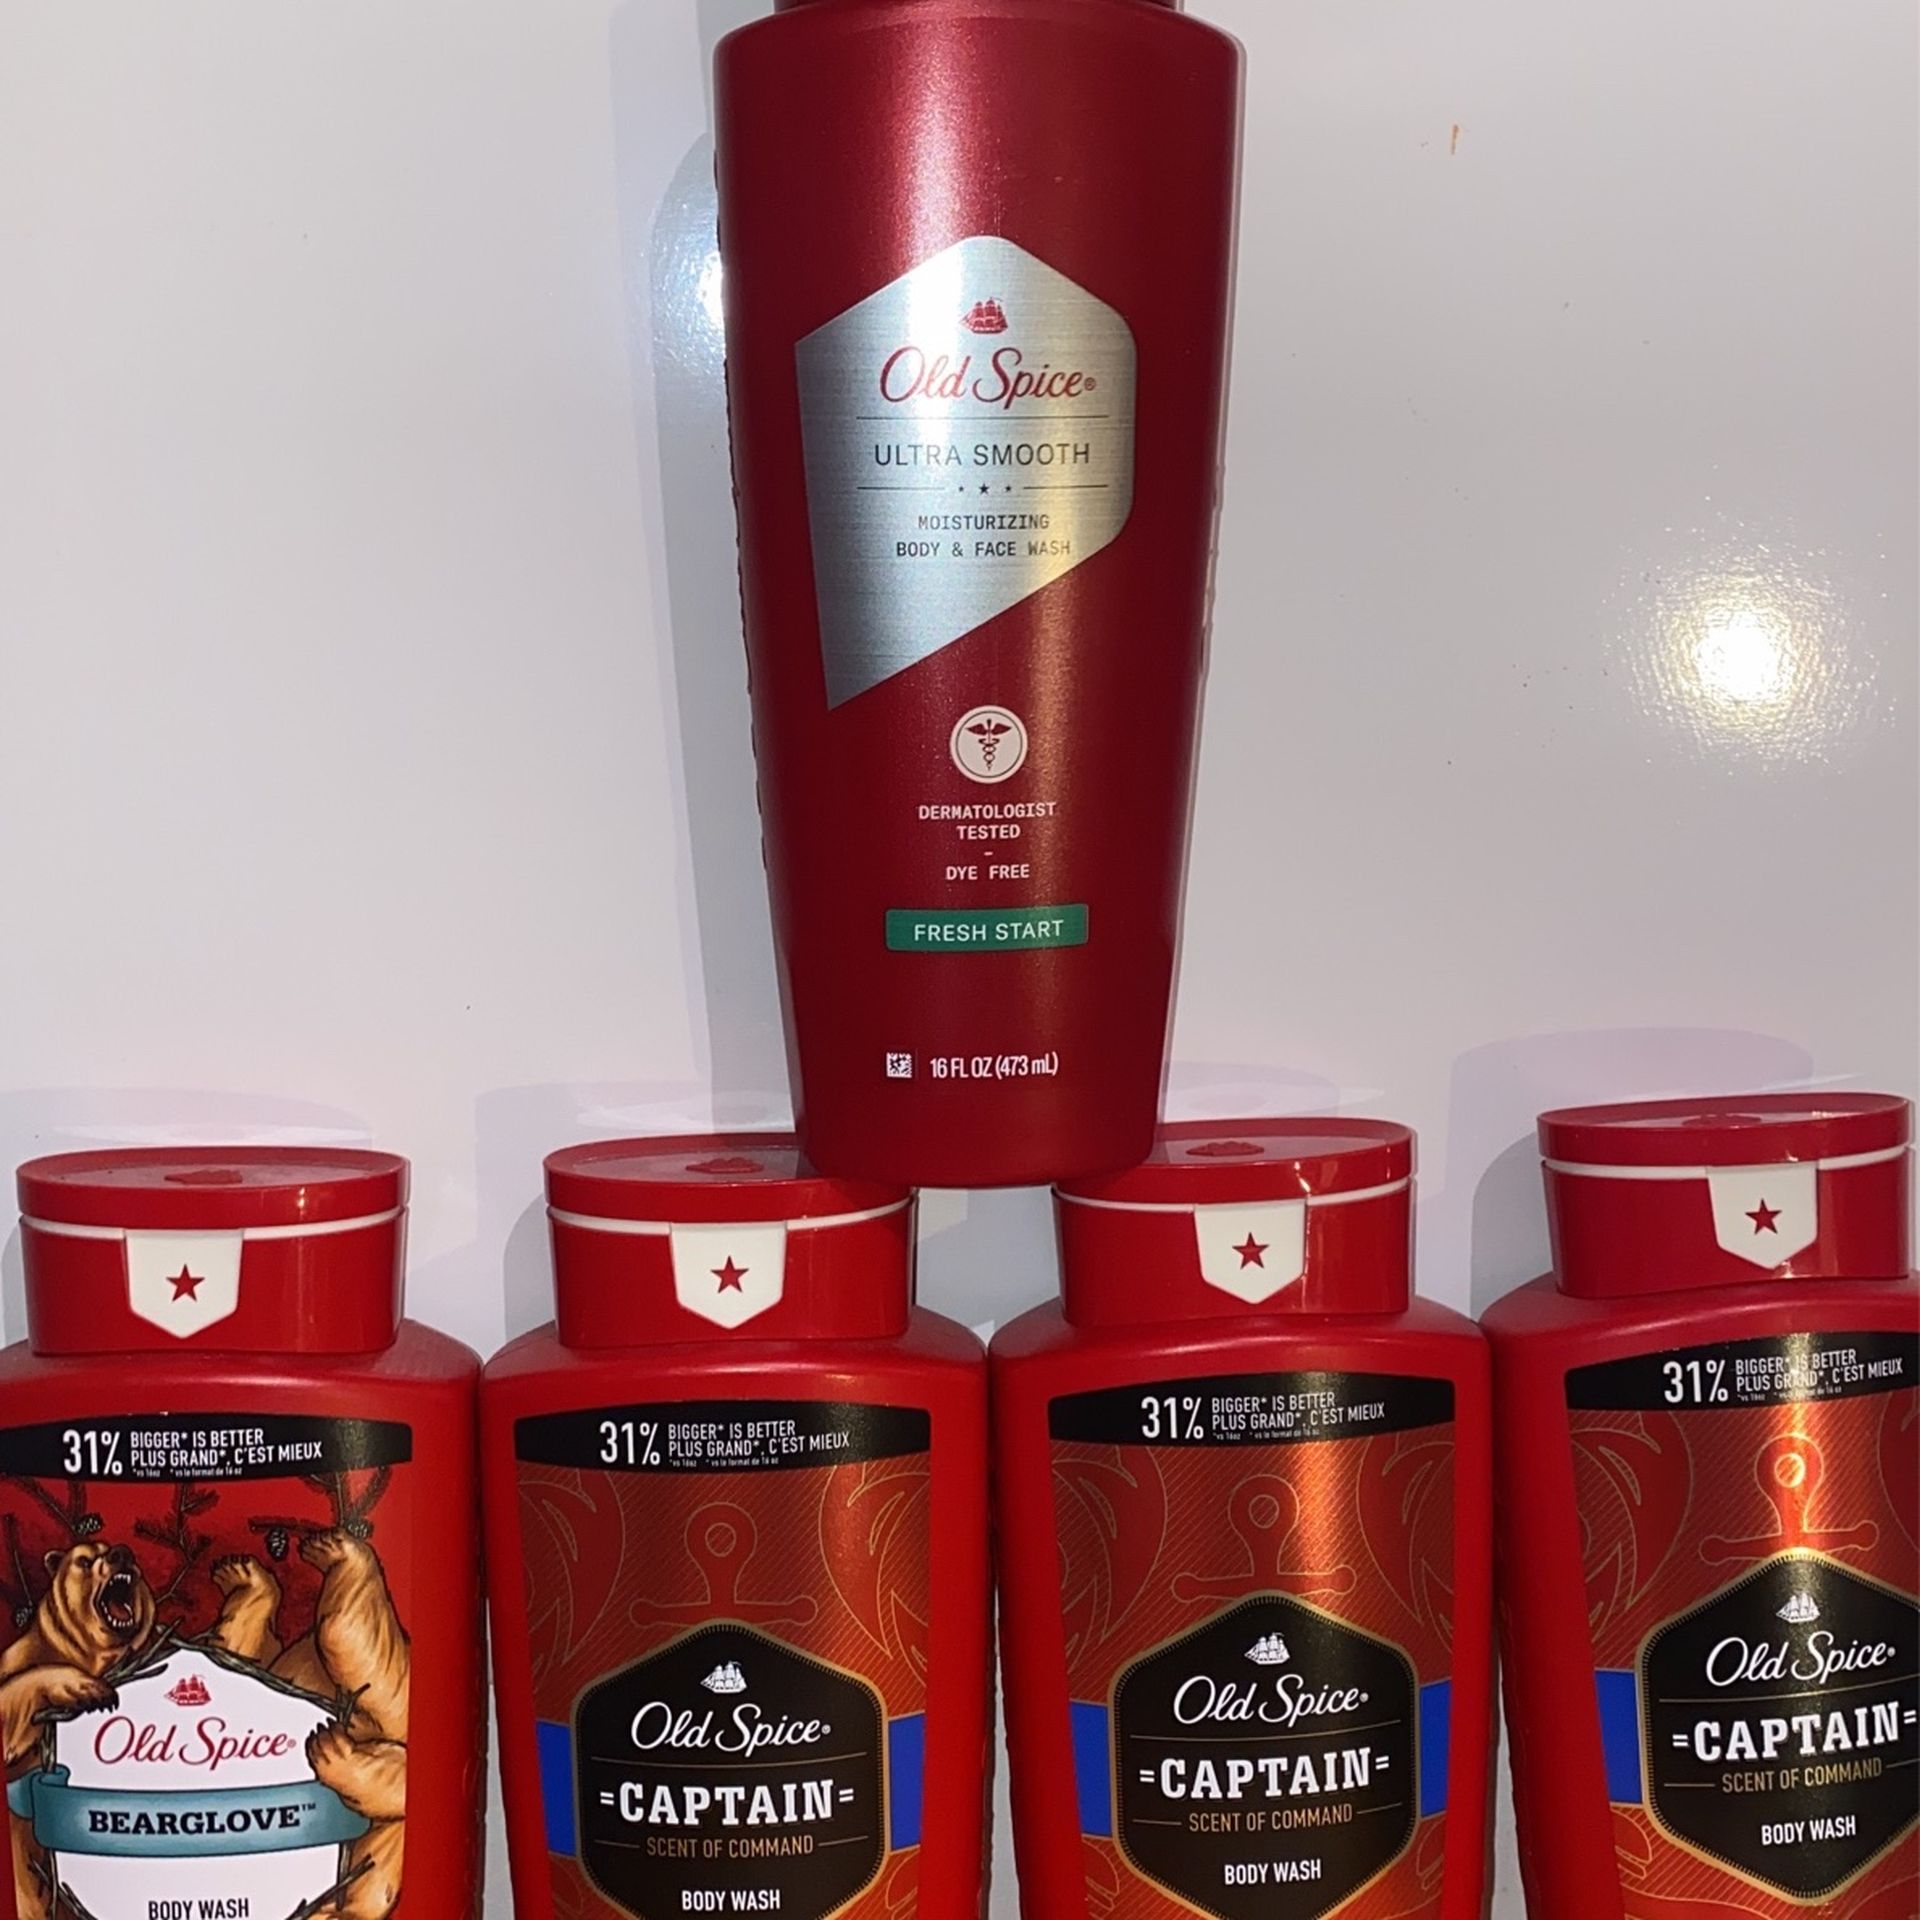 SALE ON OLD SPICE BODY WASH